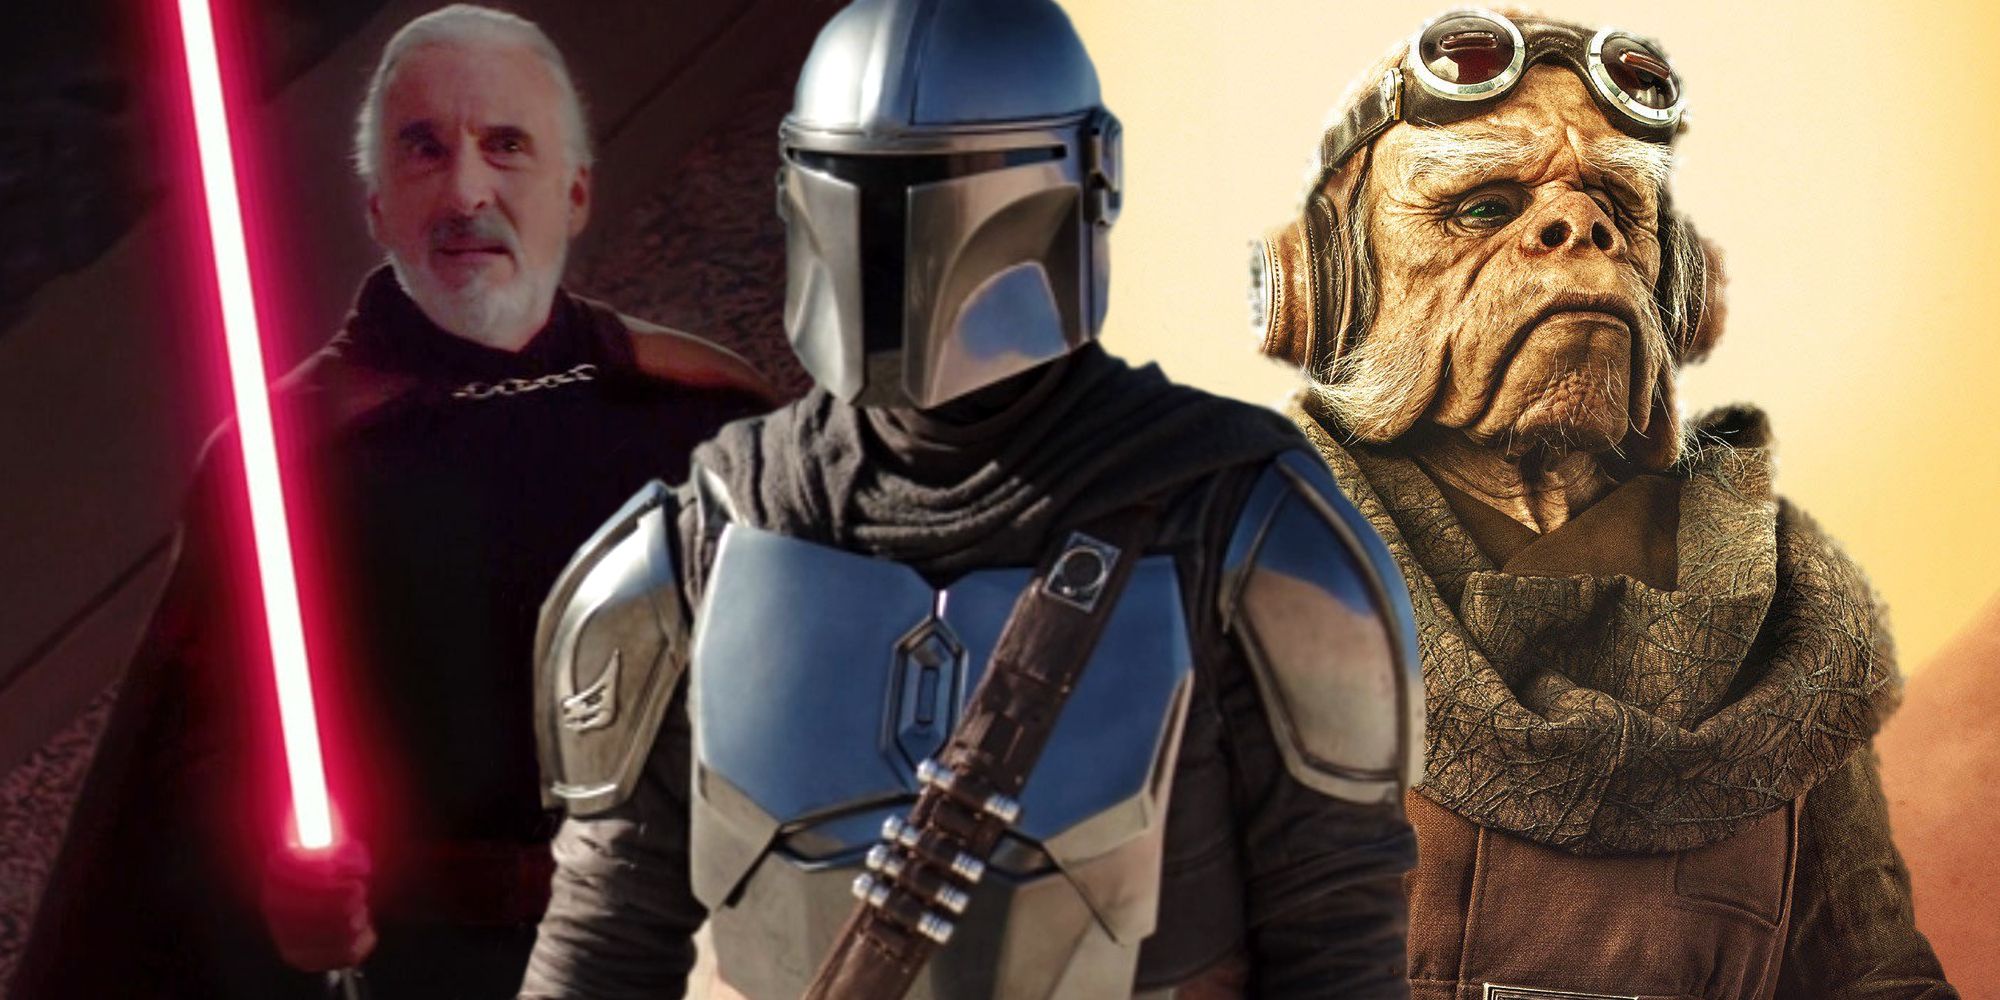 Count Dooku wielding his lightsaber, Din Djarin, and Kuill from his Mandalorian season 1 character poster